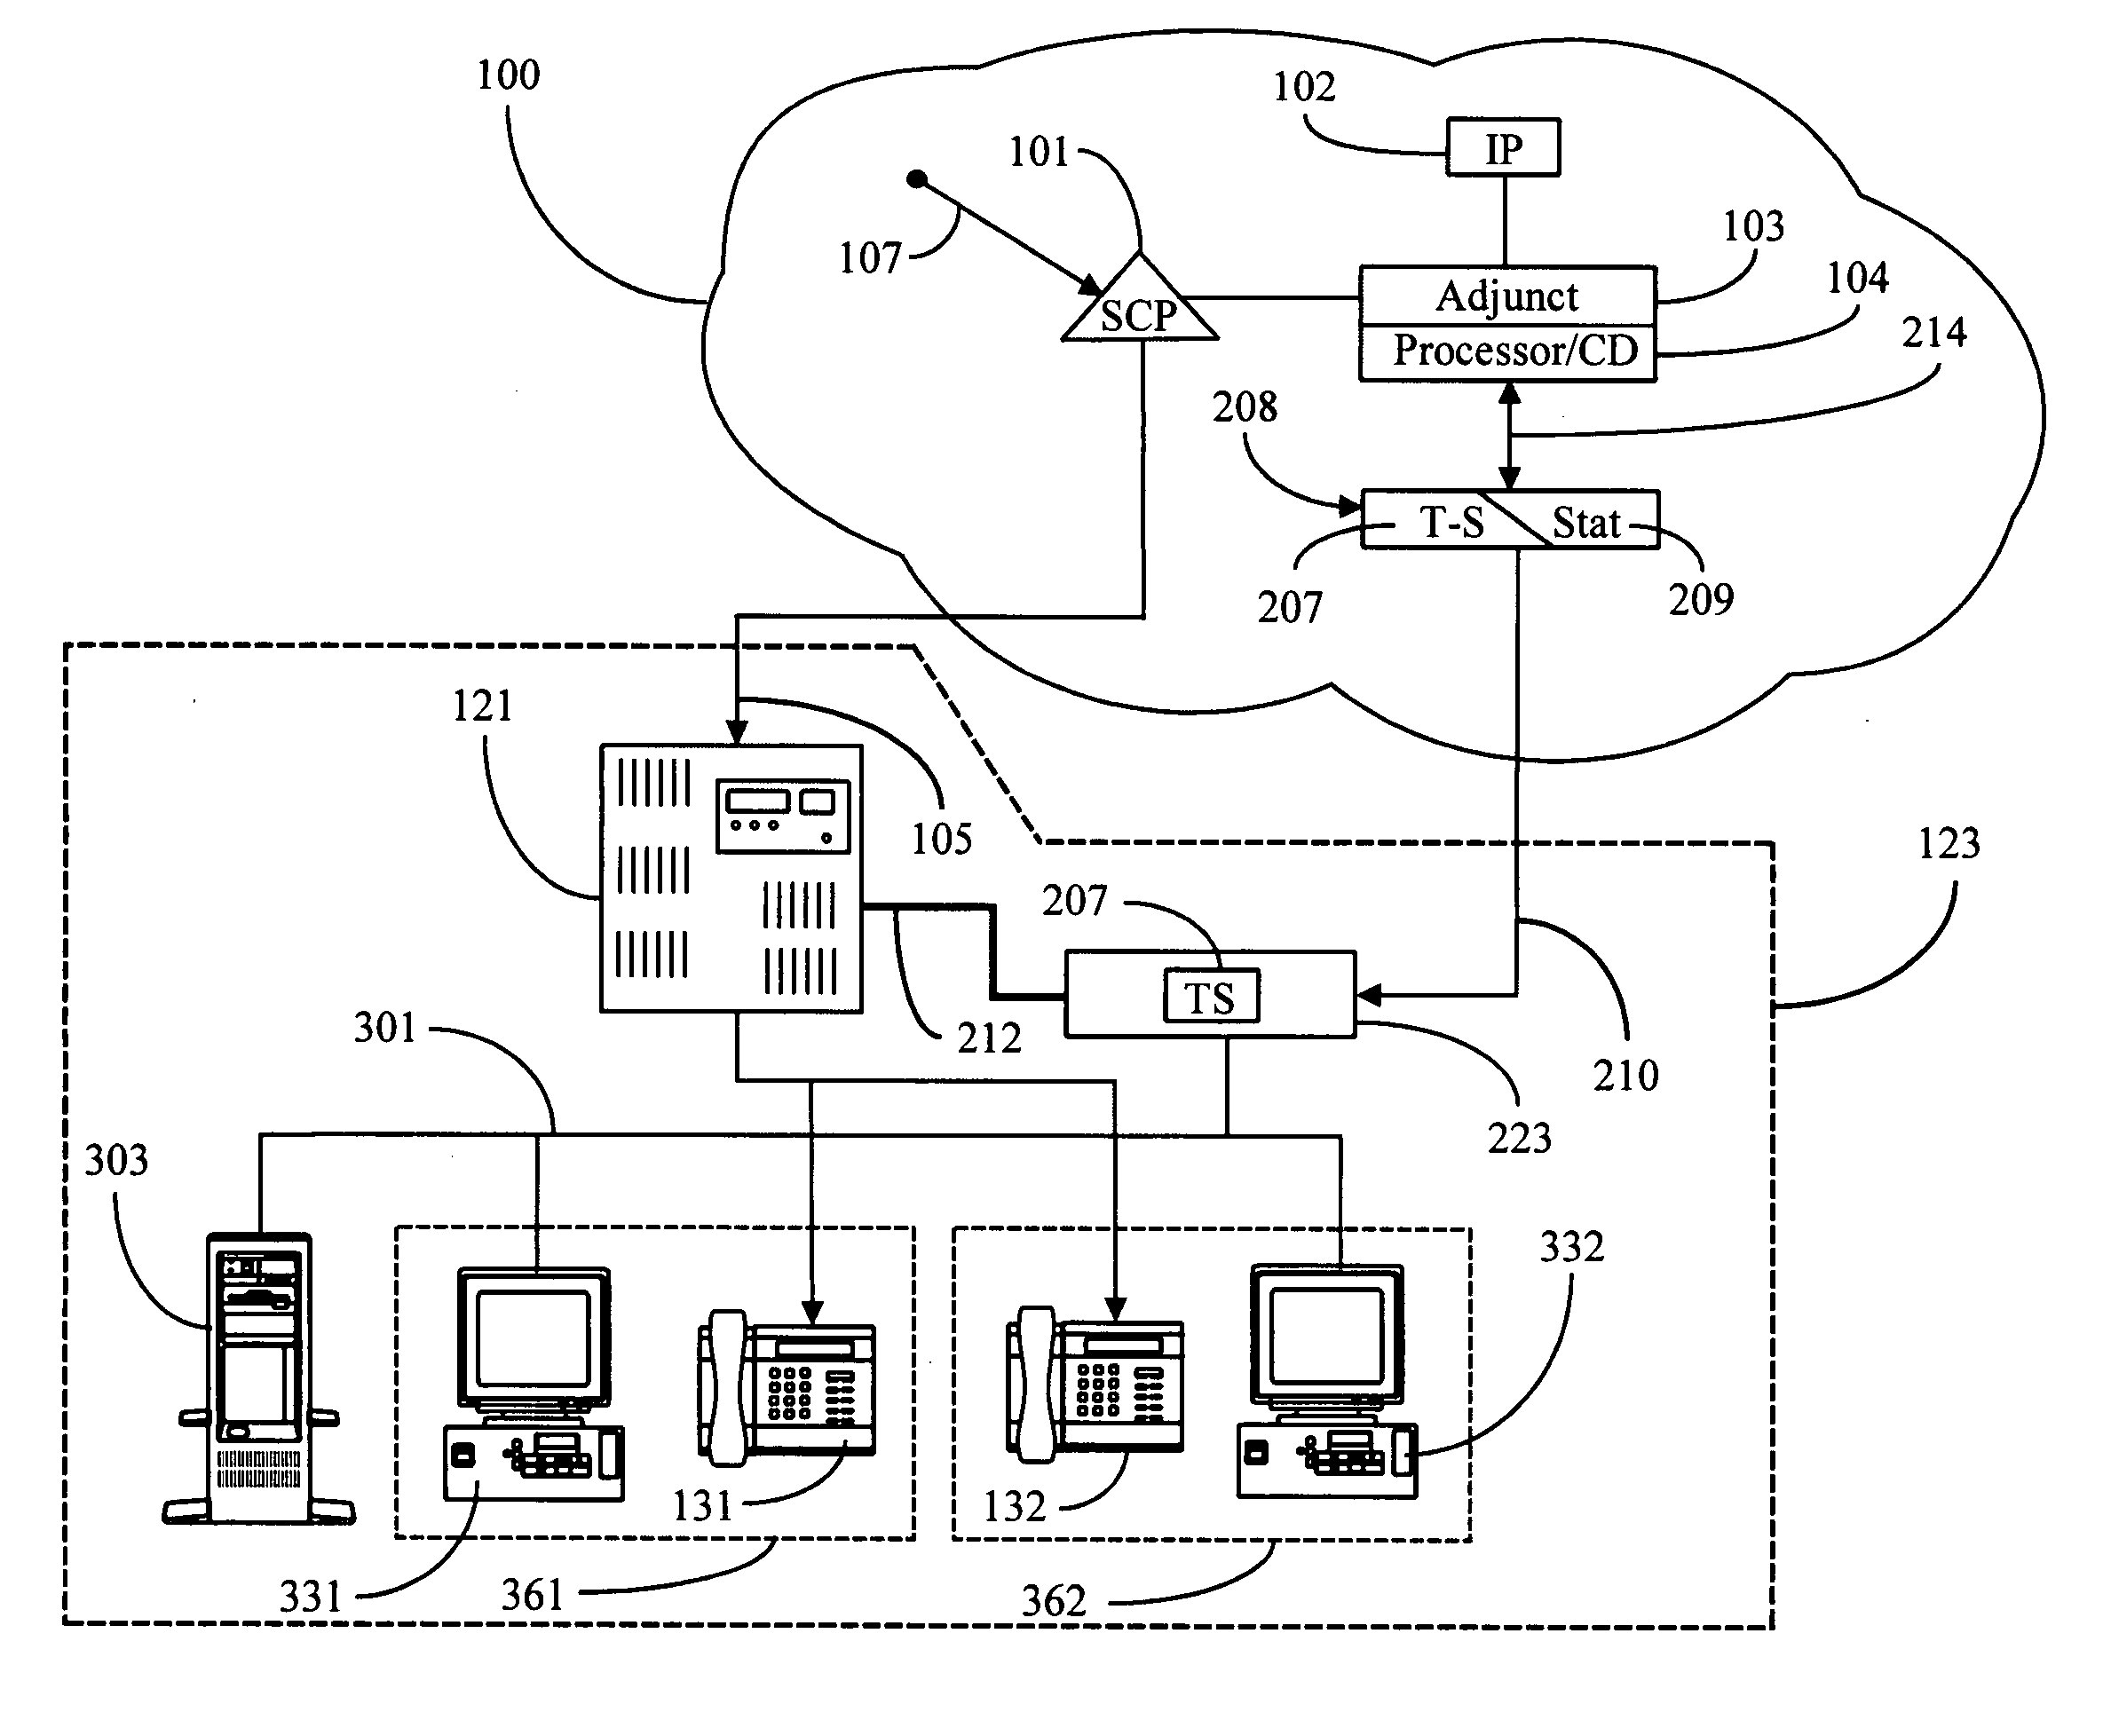 Call center apparatus and functionality in telephony